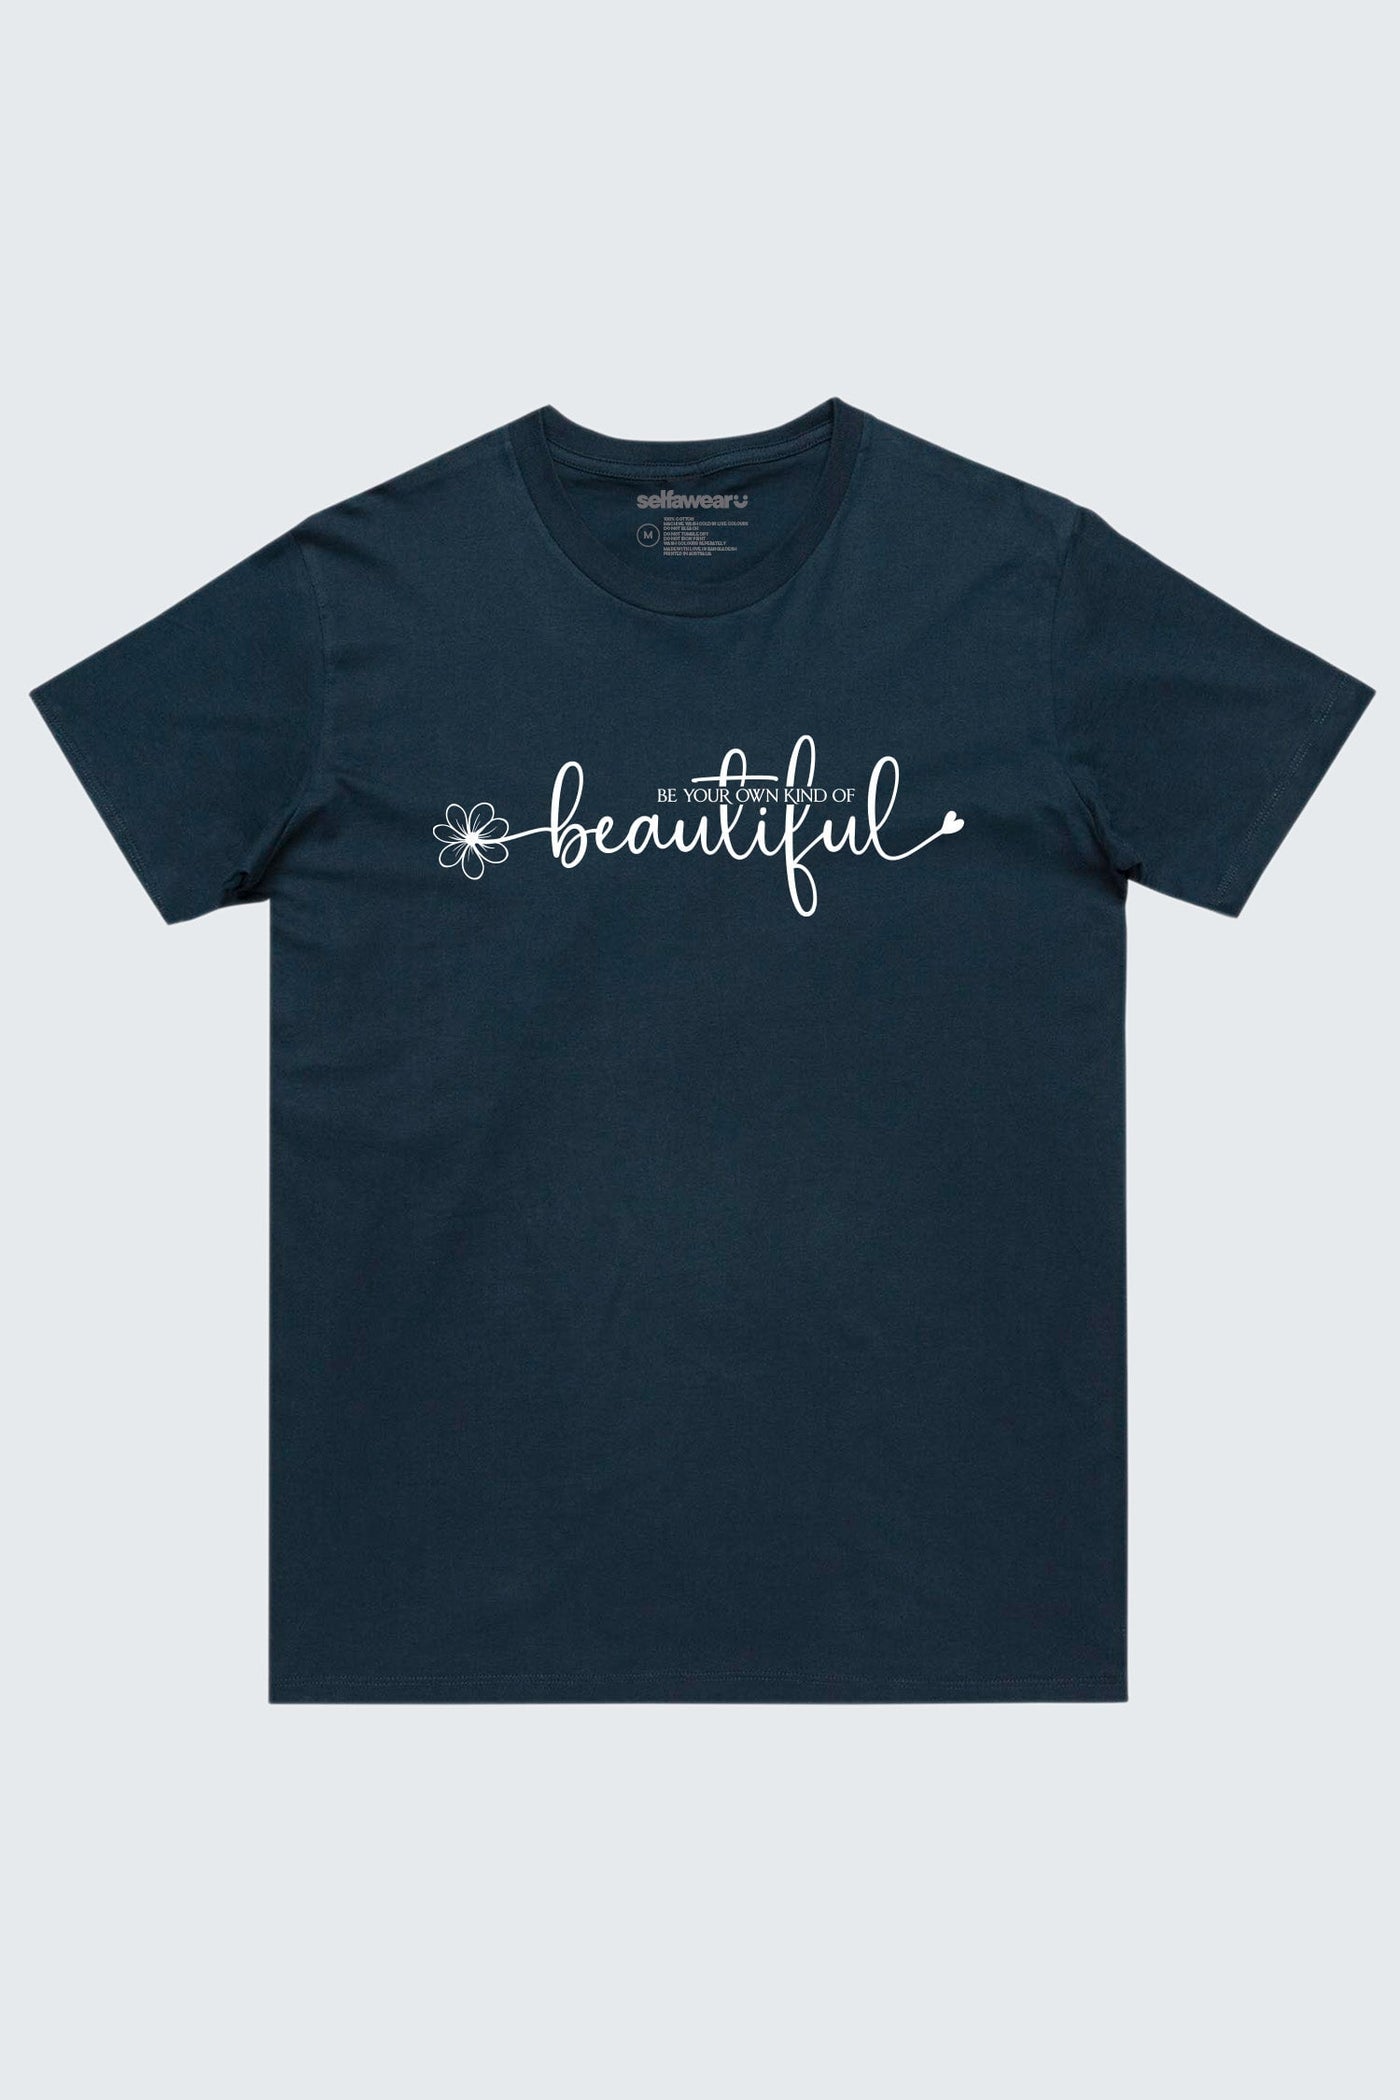 Be Your Own Kind T-Shirt Navy Shirts Selfawear 